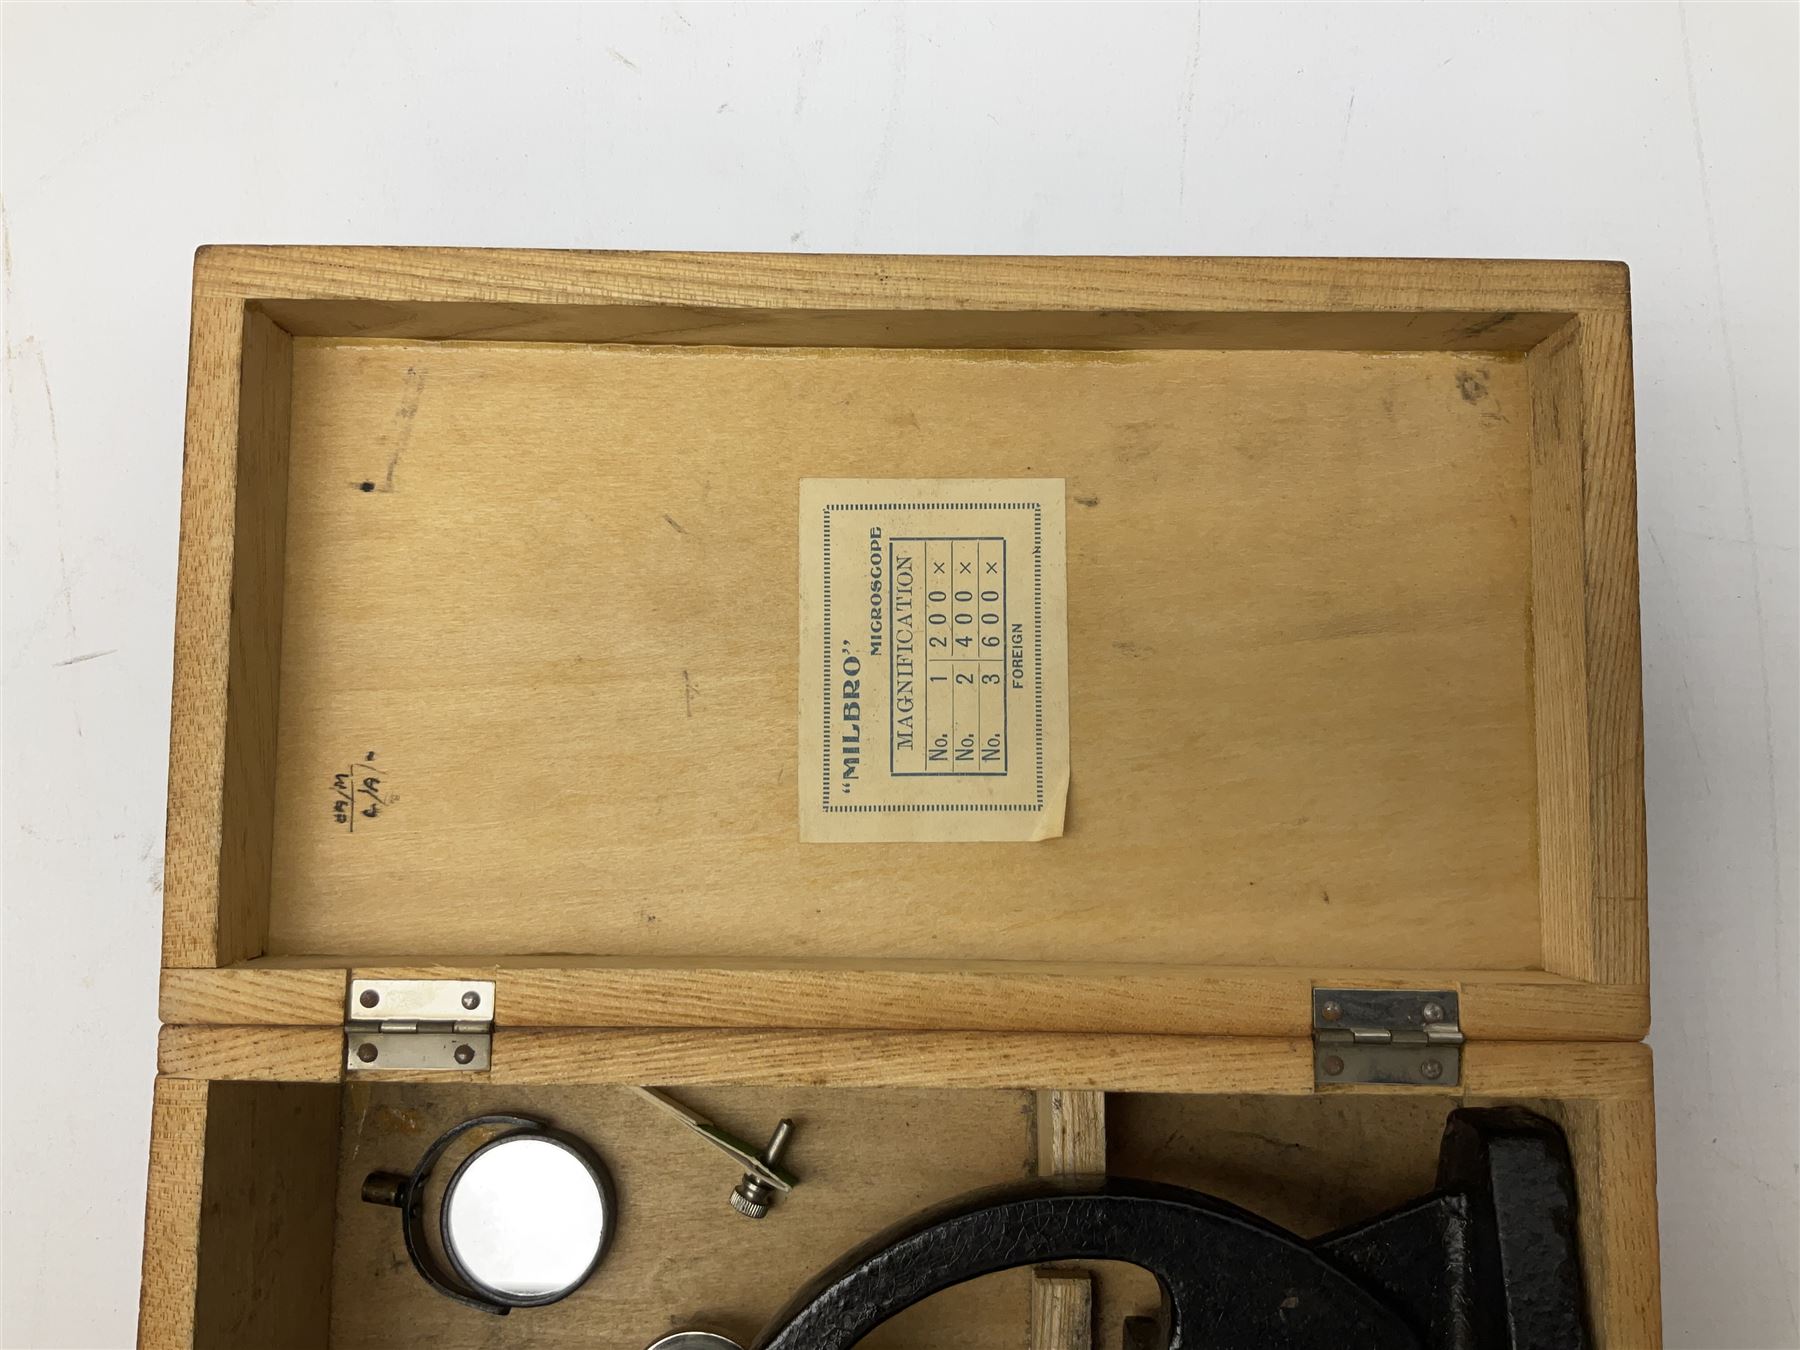 Milbro microscope in a wooden case - Image 11 of 12